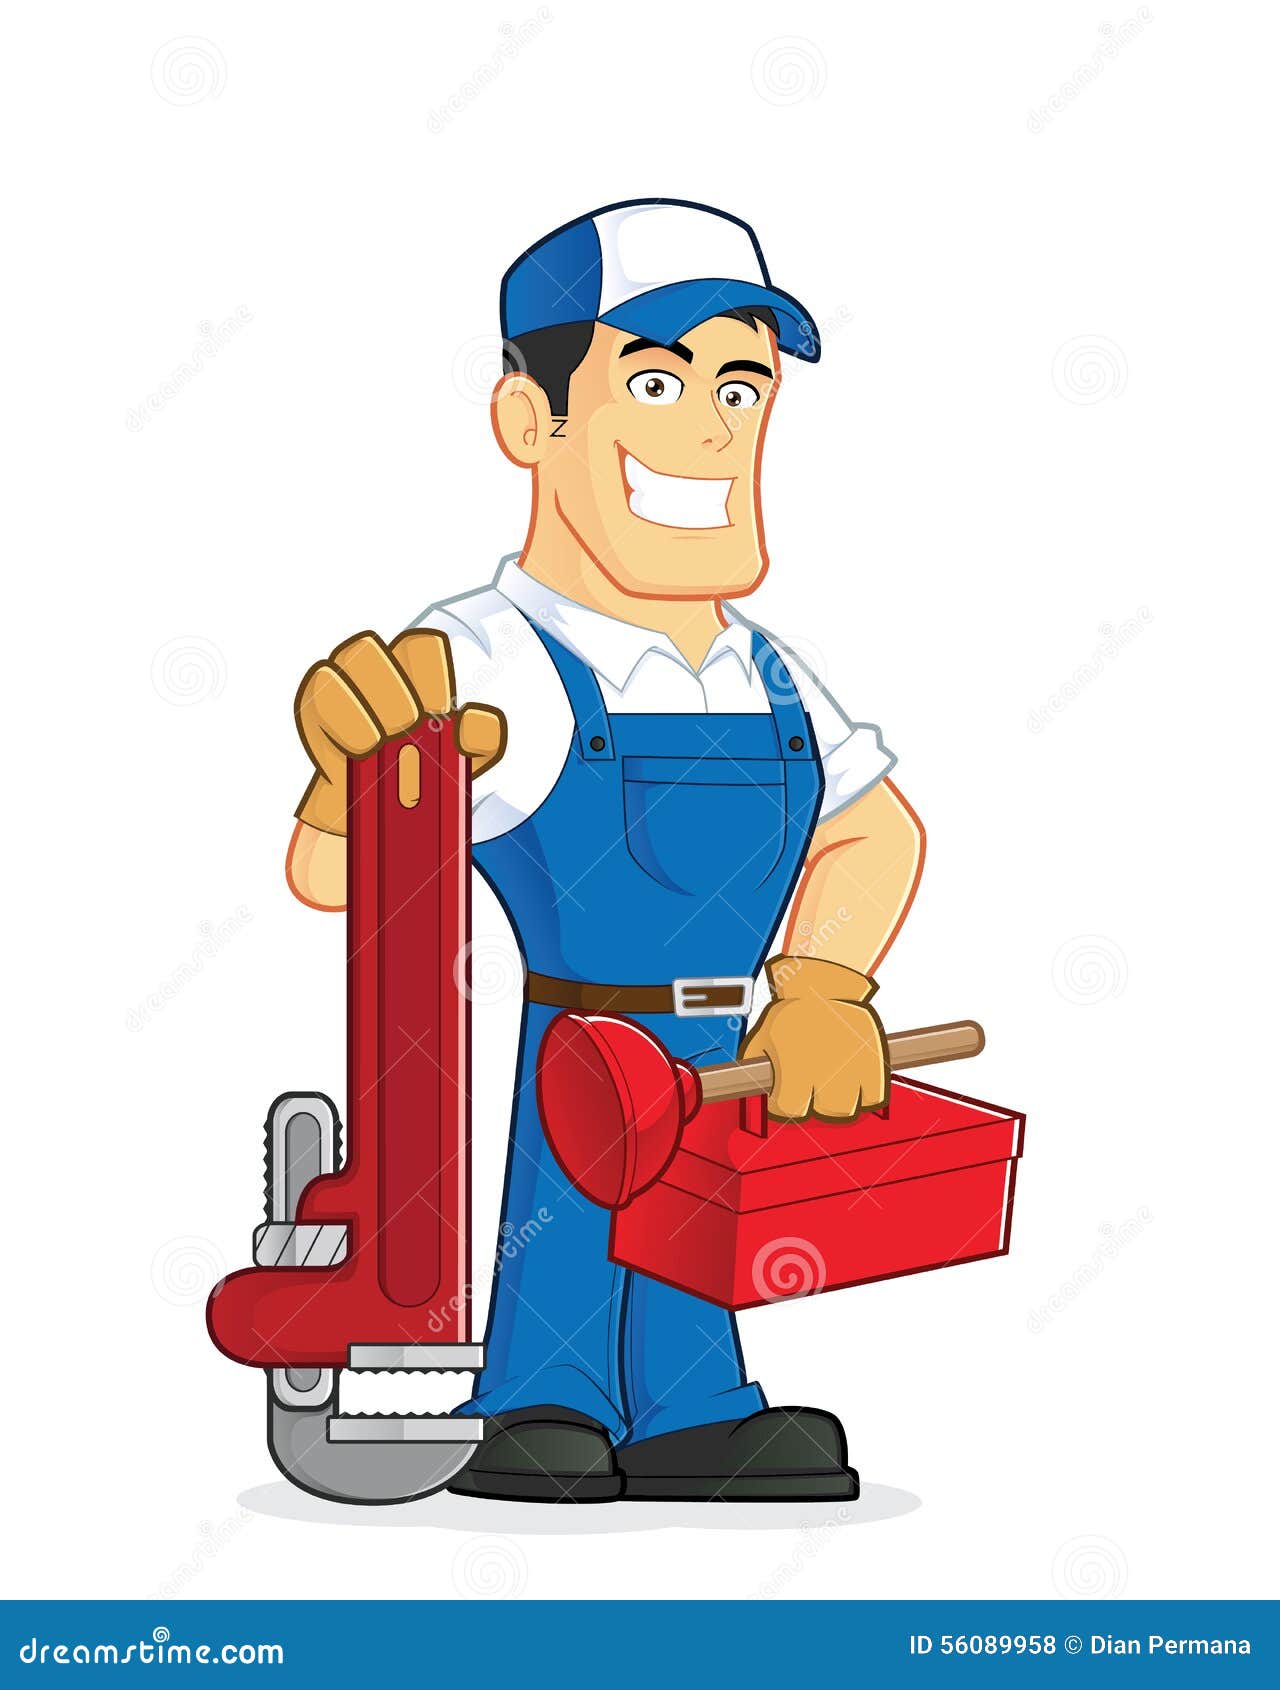 plumber-holding-tools-clipart-picture-cartoon-character-56089958.jpg